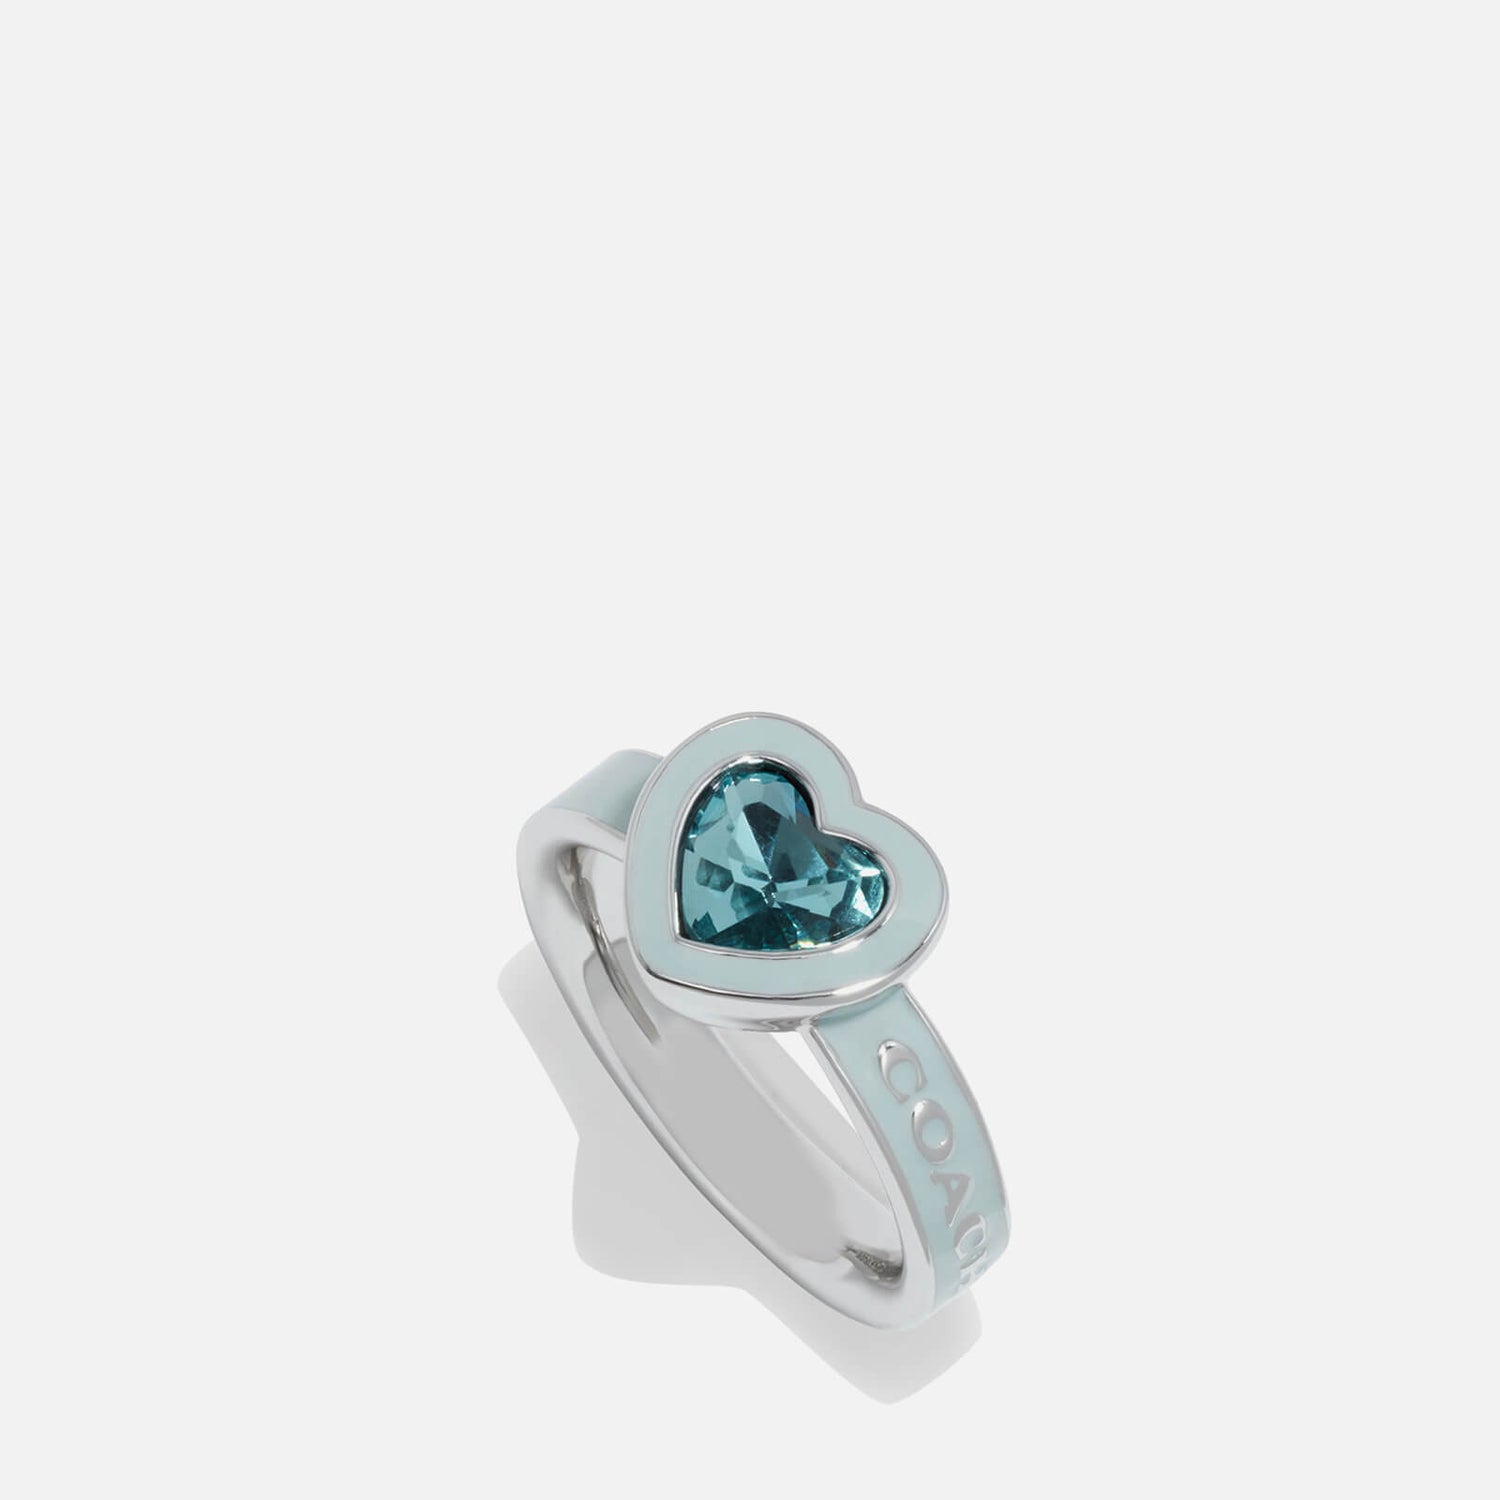 Coach Charming Crystals Silver-Plated Ring